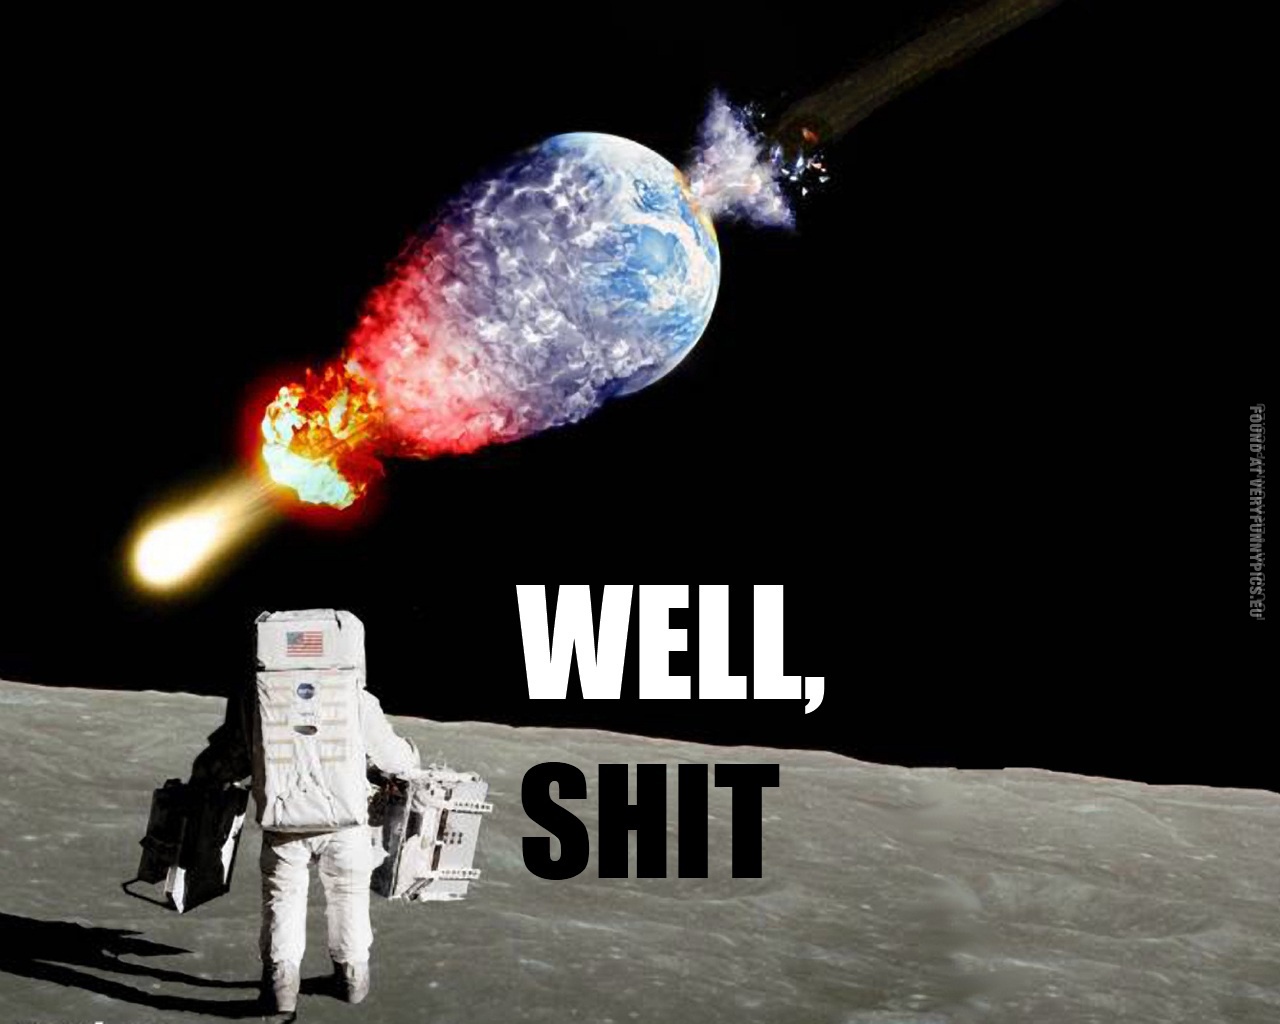 Funny Picture - Well, shit - Astronaut on moon looking at exploding earth